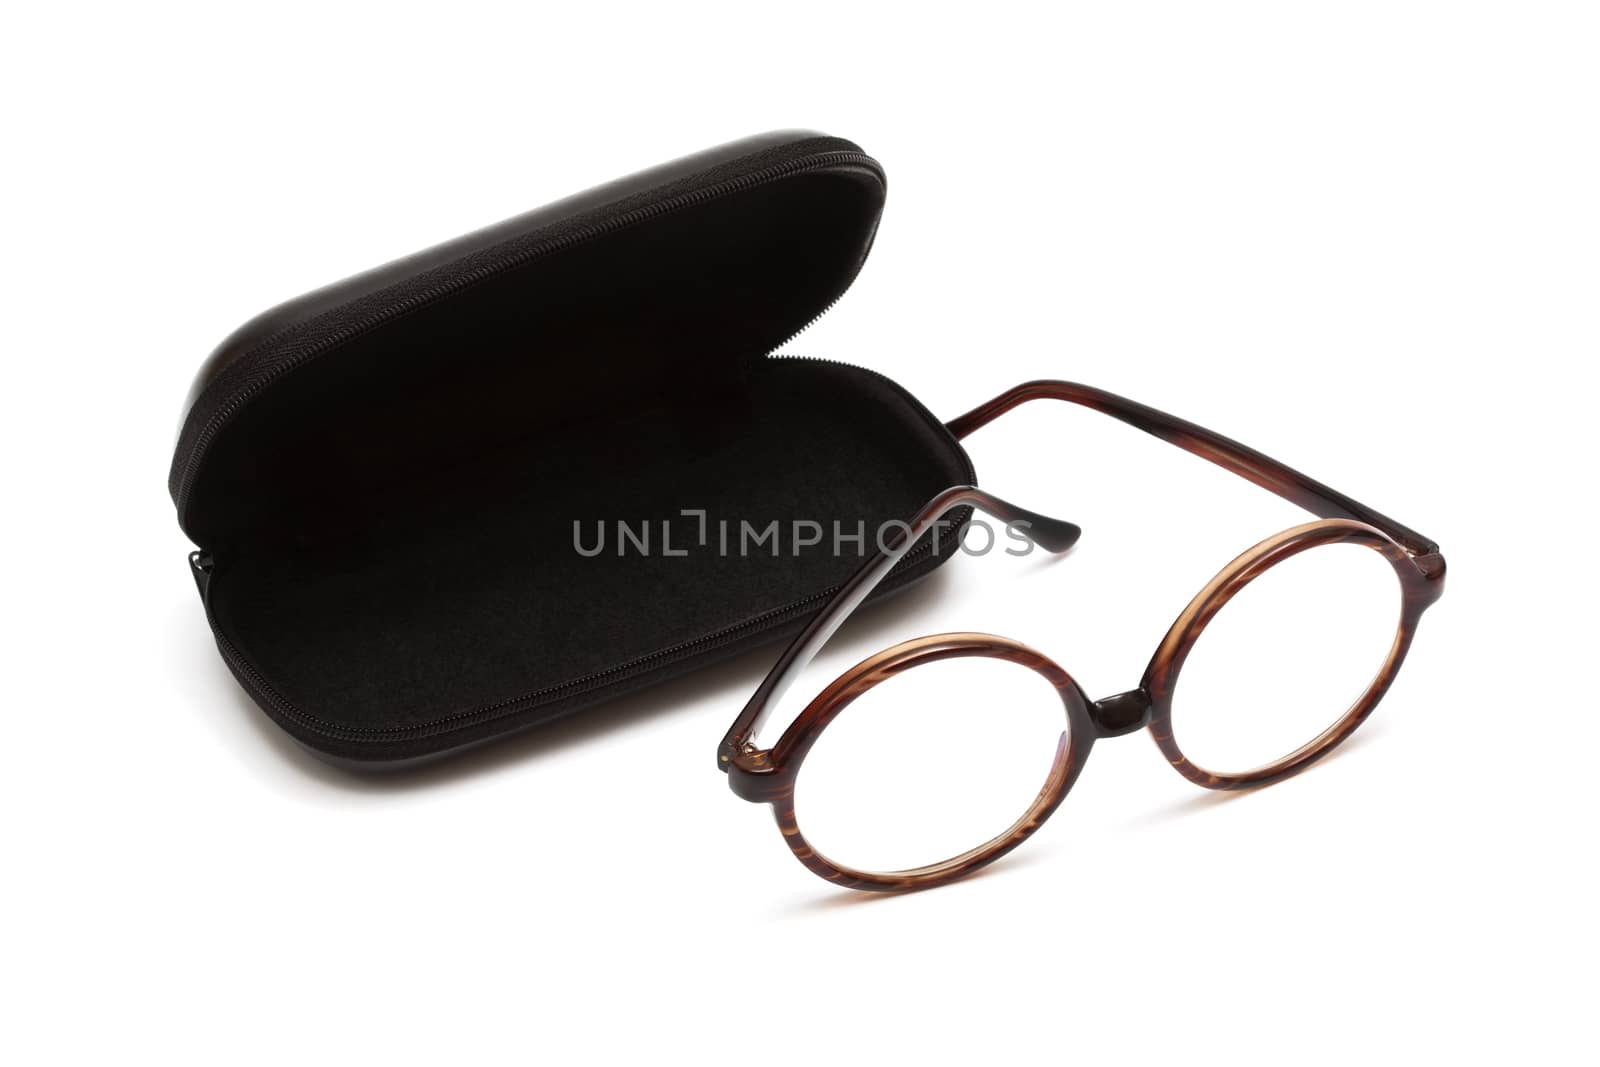 glasses in case against a white background